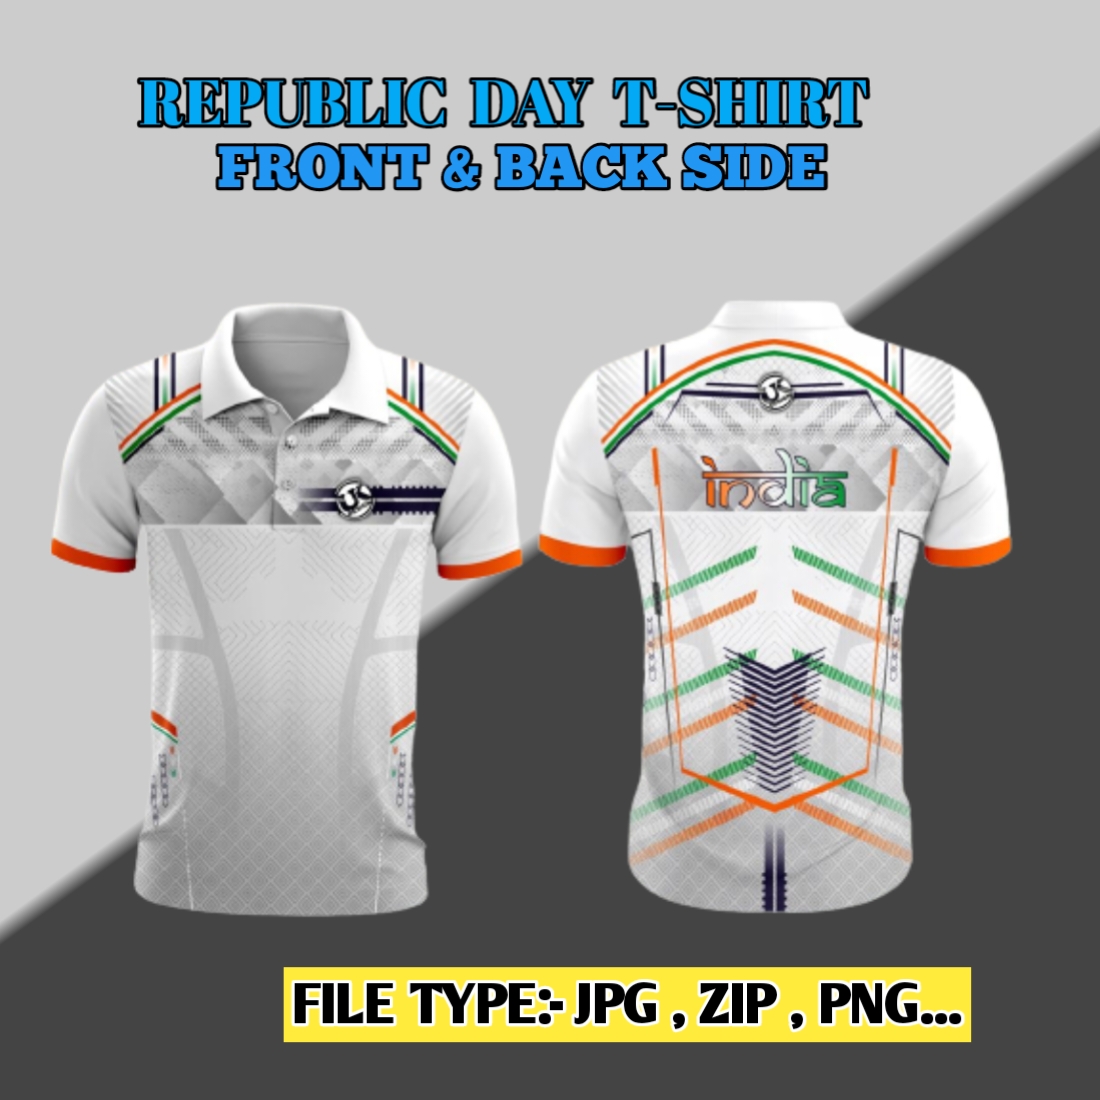 Republic Day T-shirts preview image.